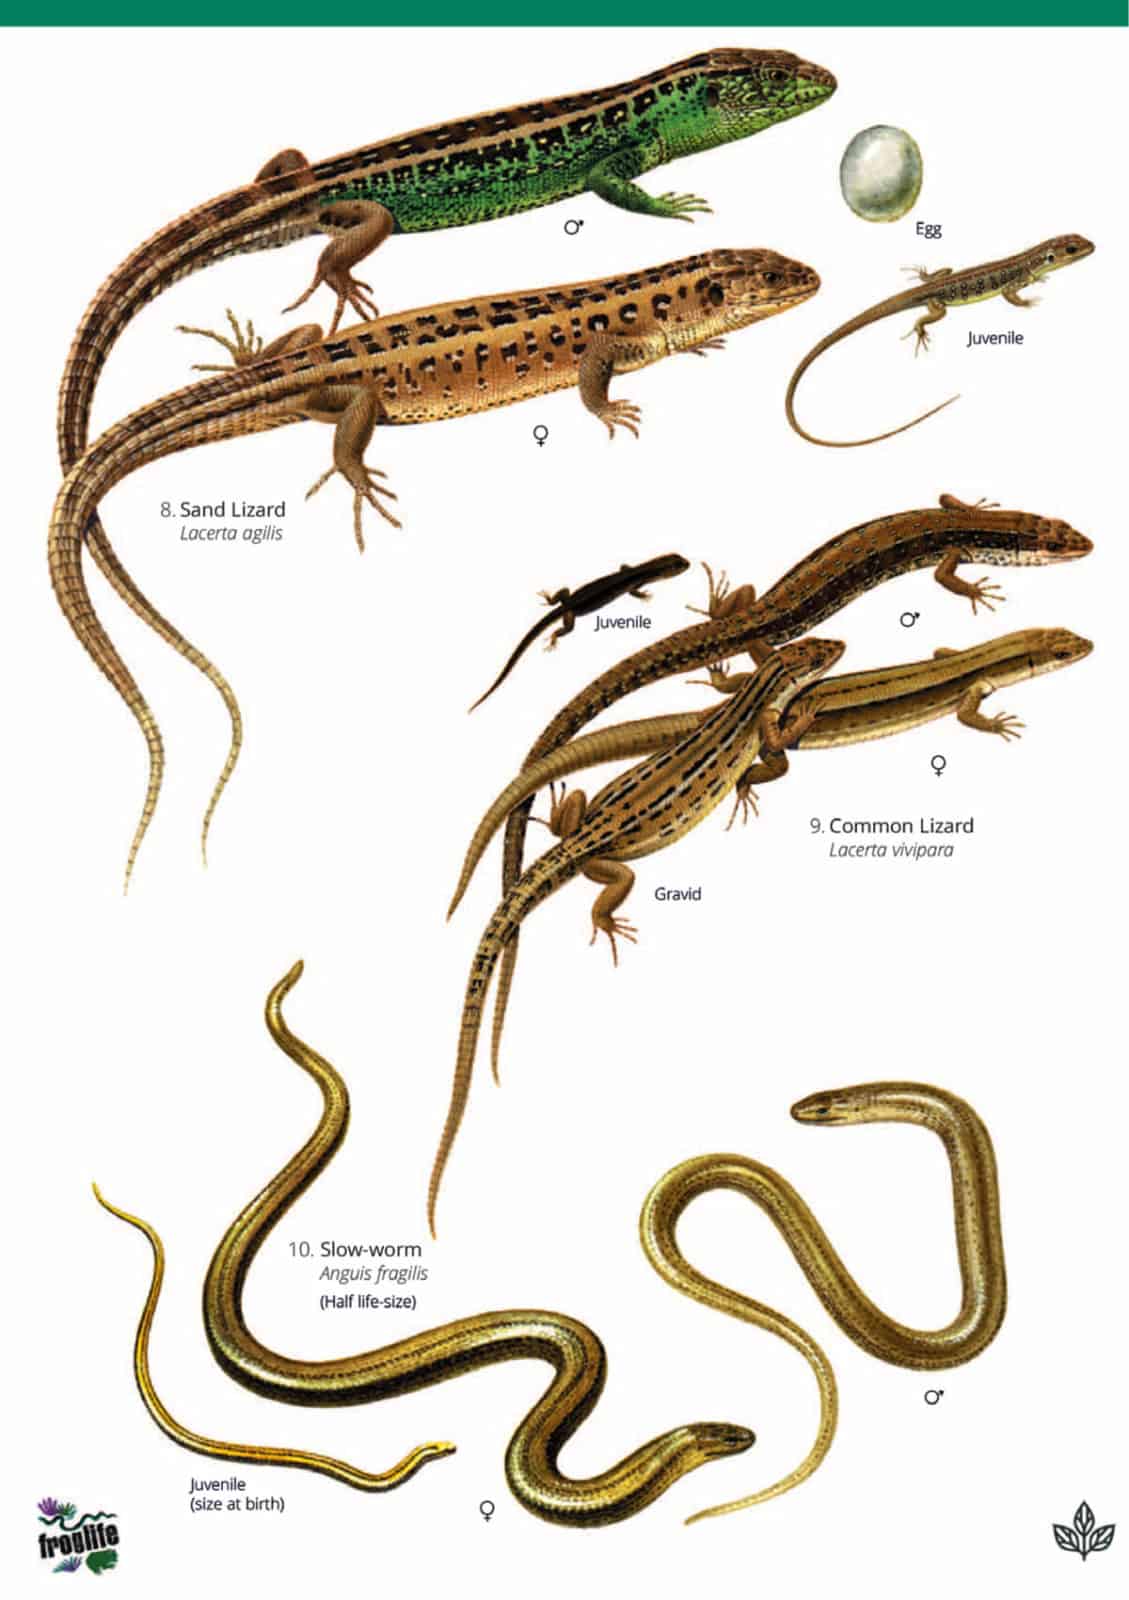 Reptiles and amphibians guide